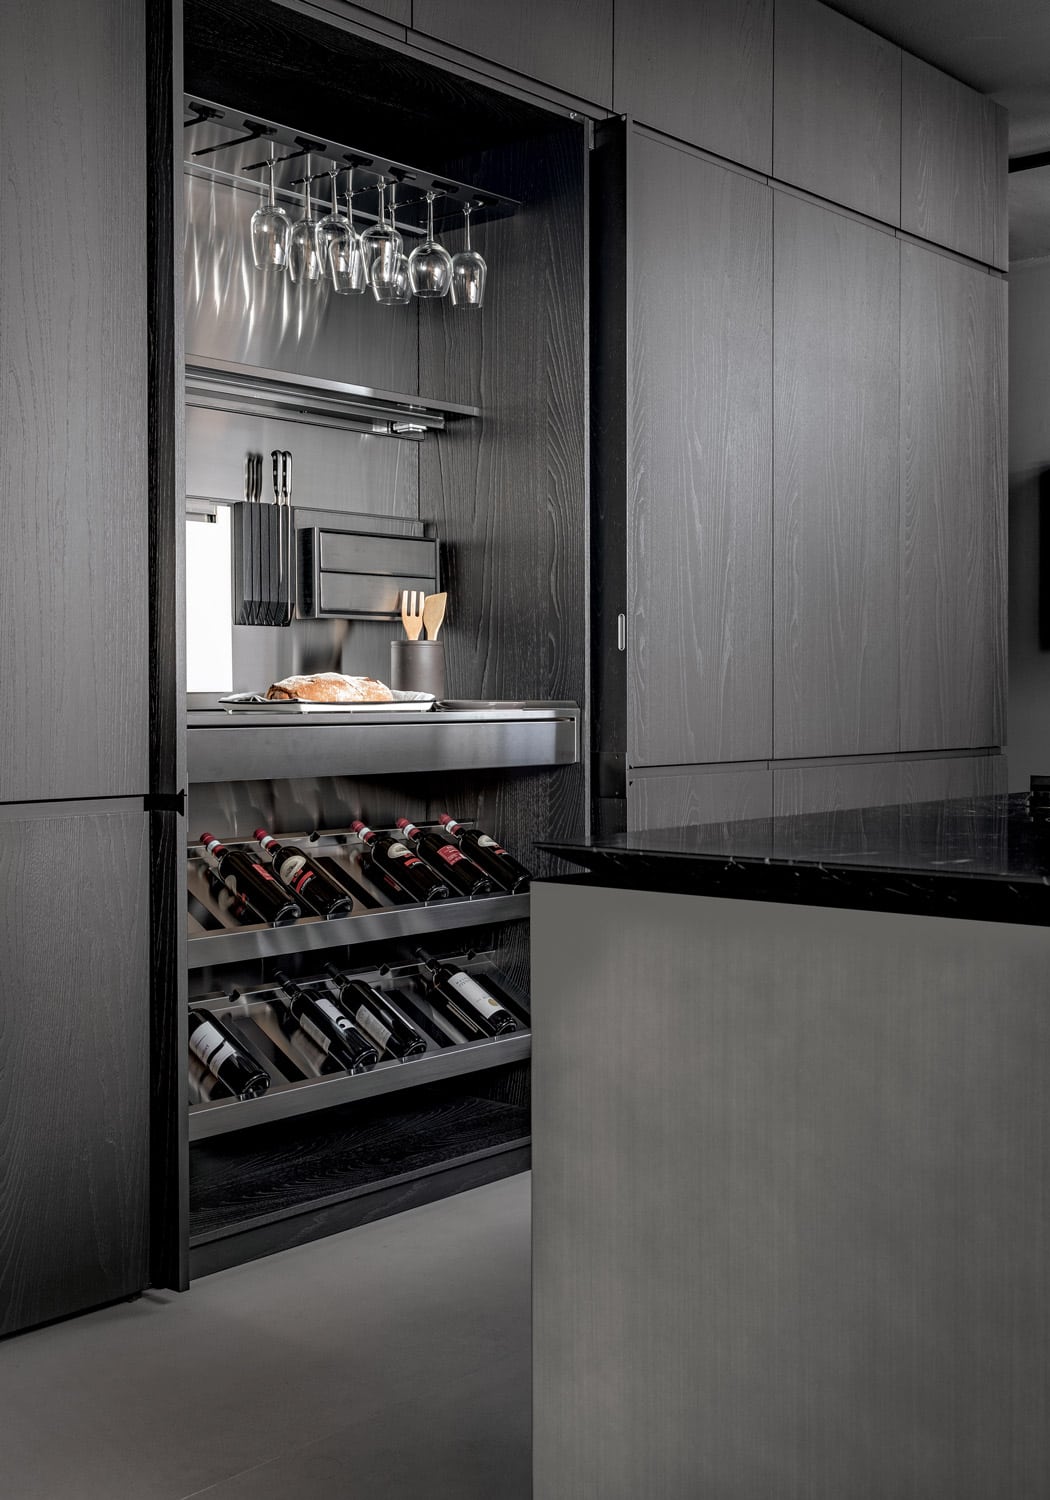 Multifunctional tall unit customized to house wine racks, drawers, glassware, and knives while also including a full pull-out stainless steel worktop to extend the usable surface area.